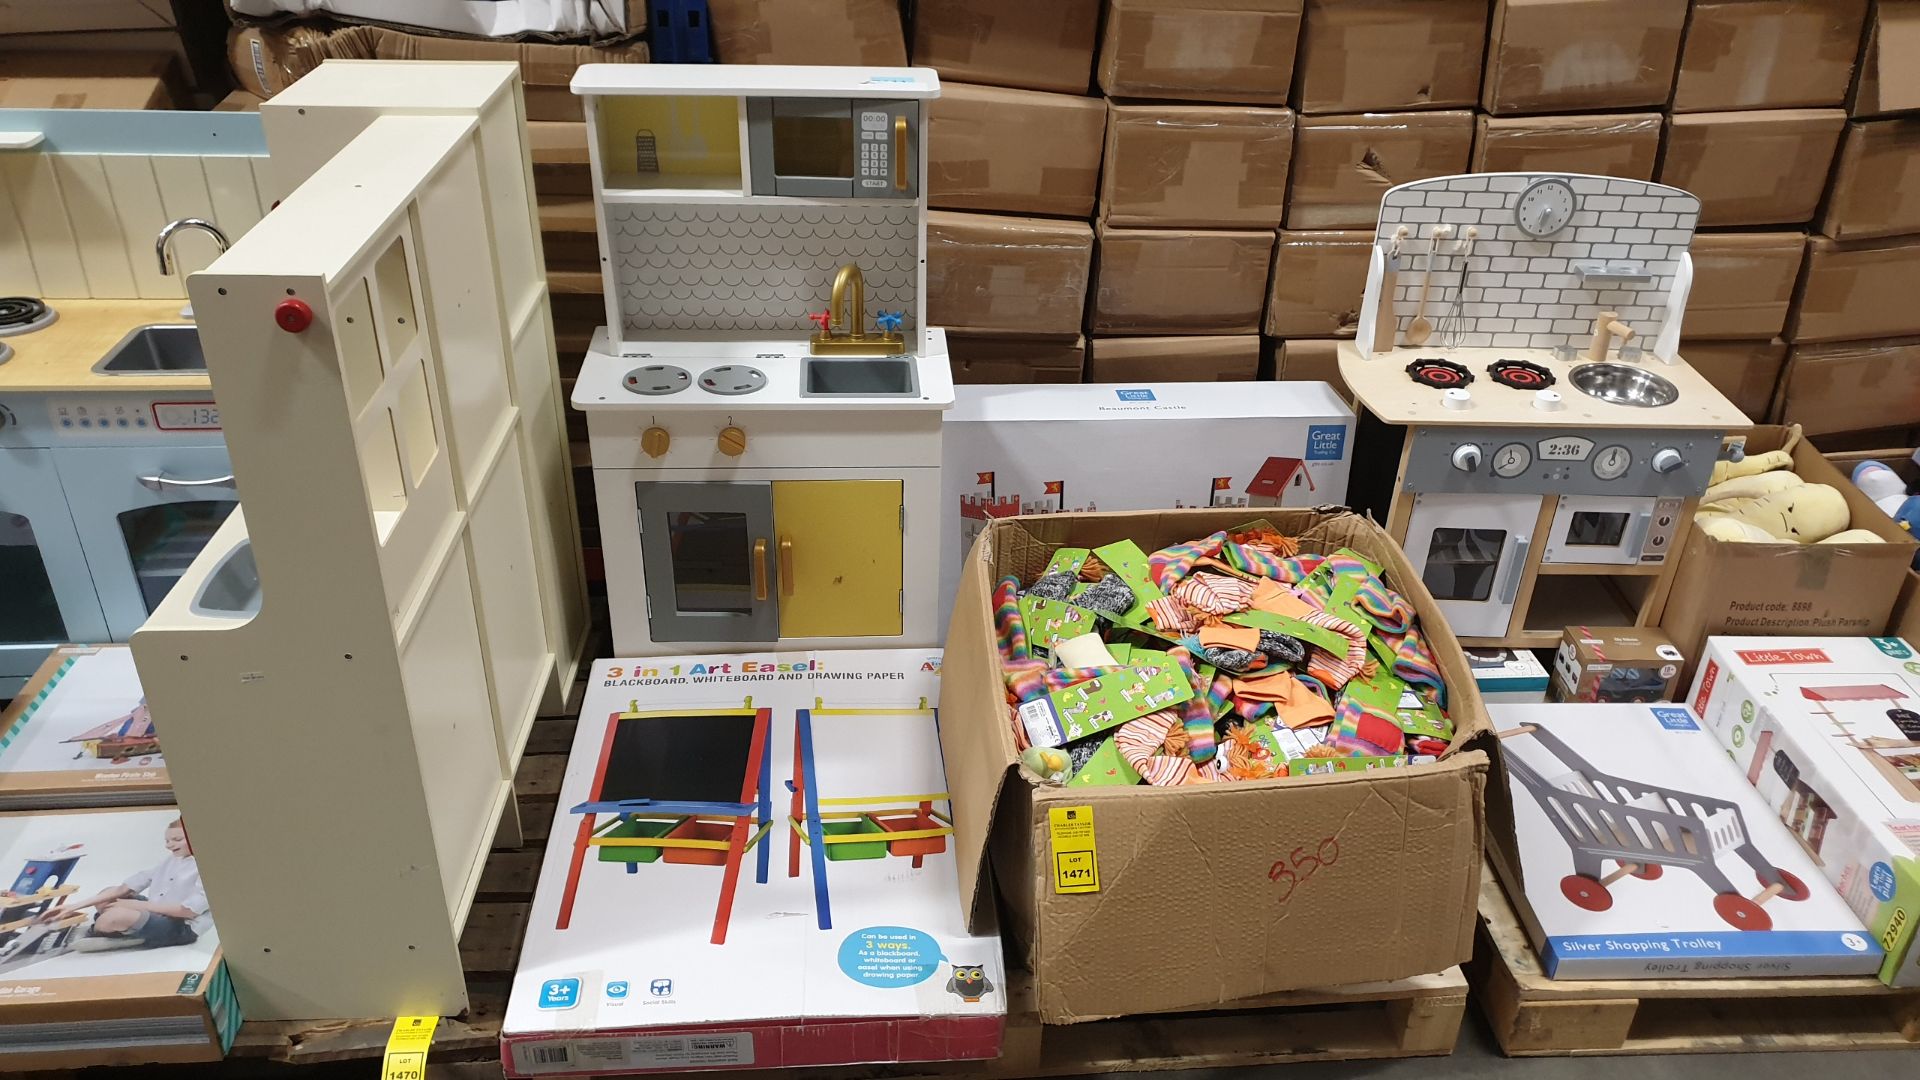 (LOT FOR THURSDAY 28TH MAY AUCTION) PALLET CONT KIDS KITCHEN WITH OVEN GRILL SINK TAPS MICROWAVE #